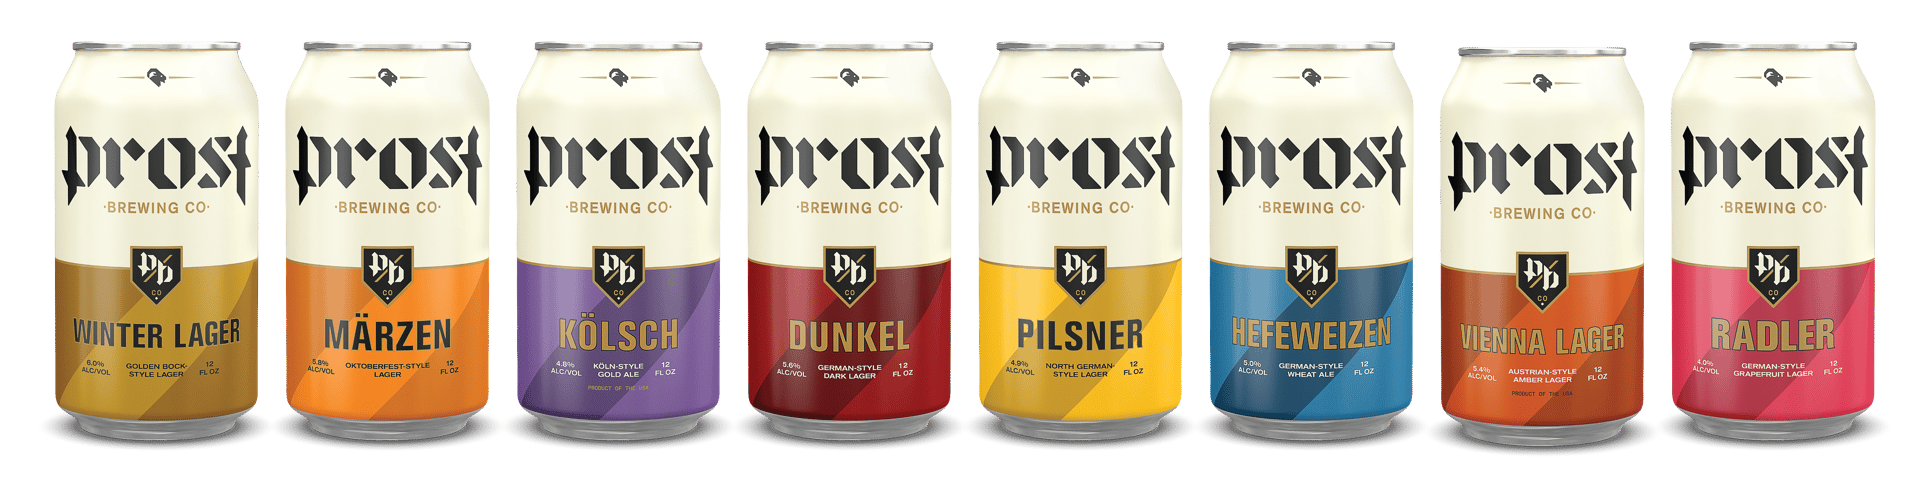 Brewing - Company Biers Prost in Colorado Our